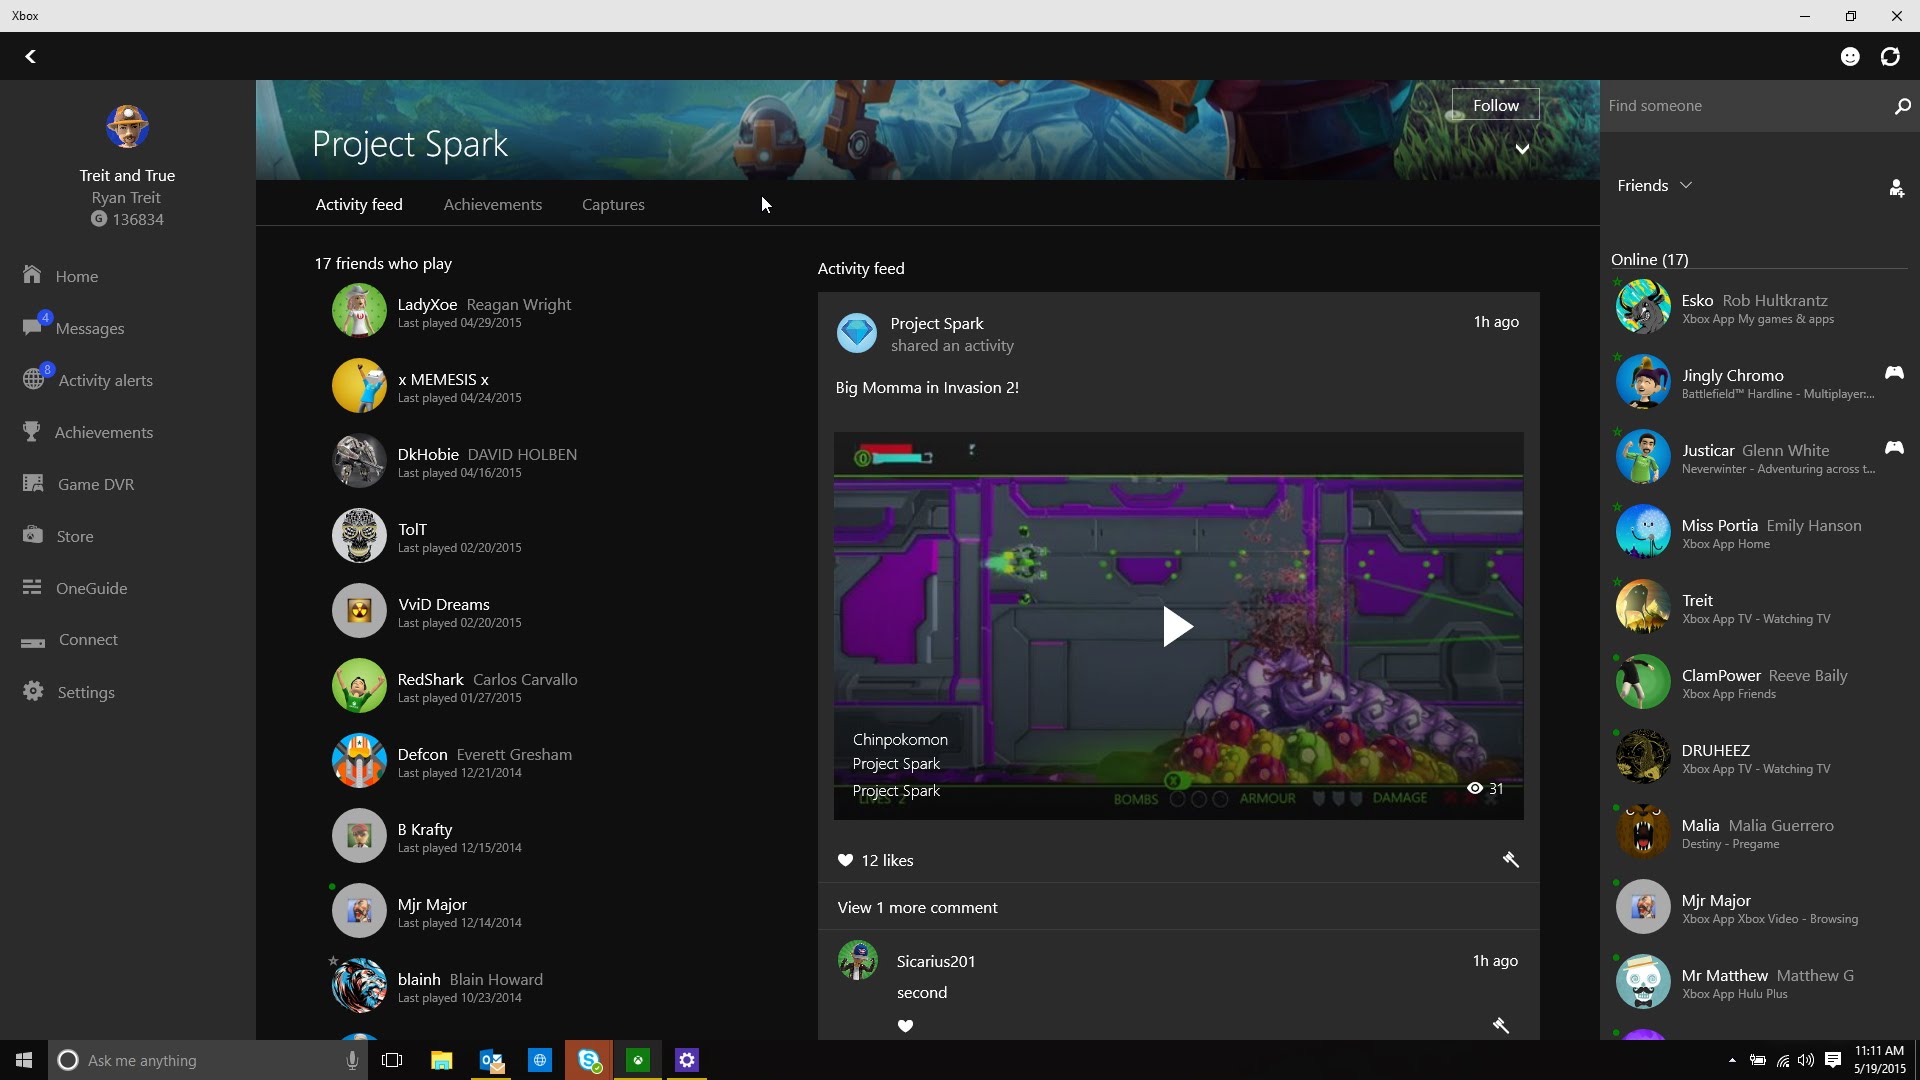 Video For New Xbox Features Now Available in Preview